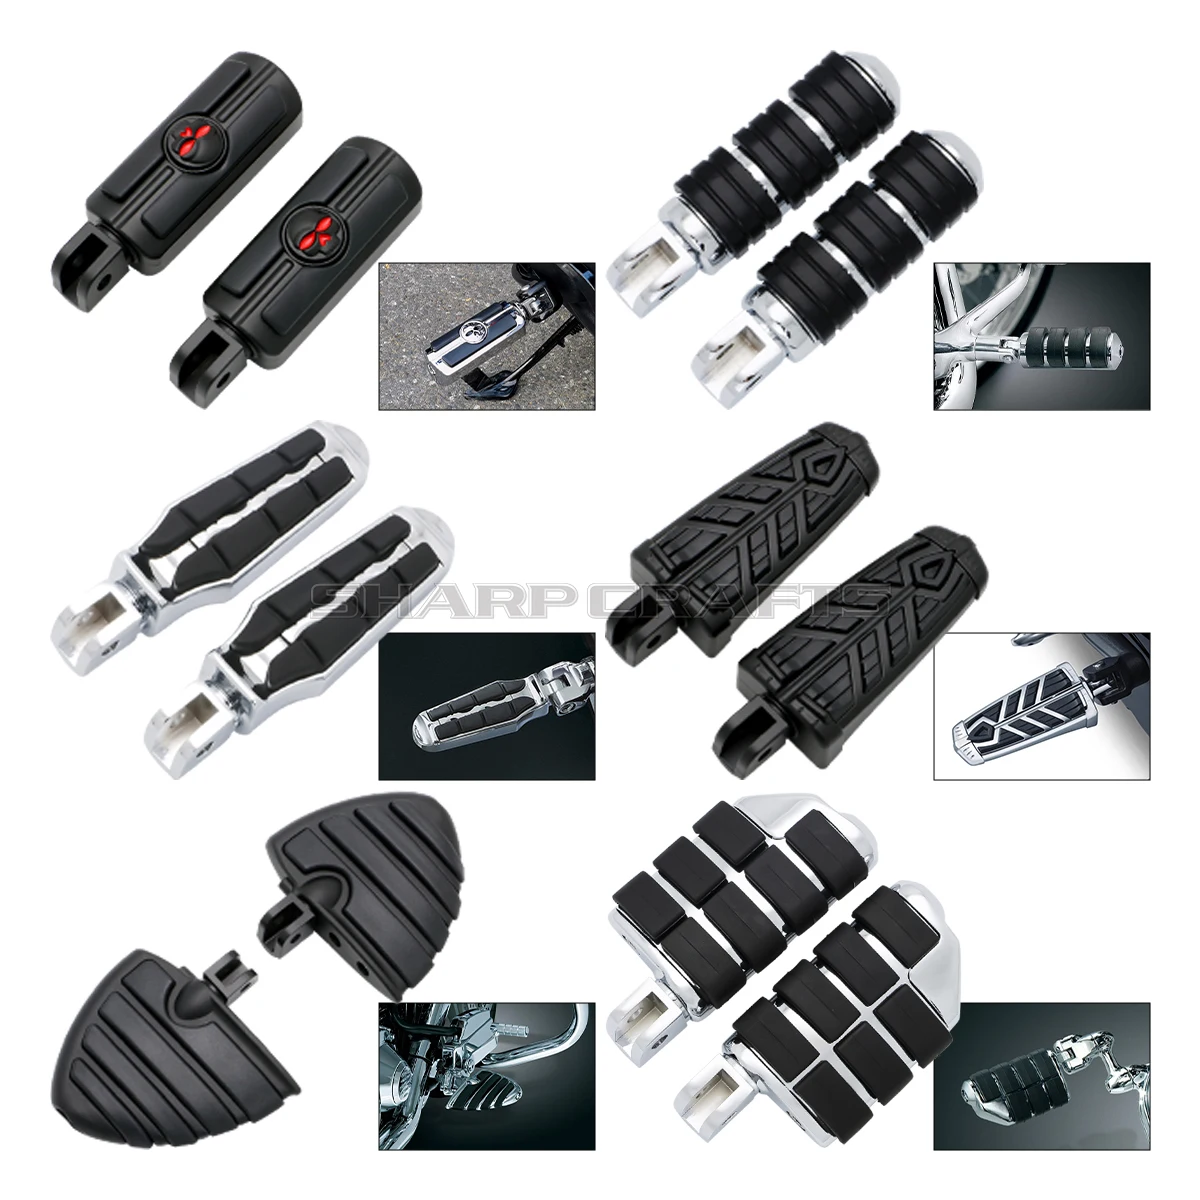 Driver rider rubber foot pegs footrests footpegs for suzuki boulevard m109r m90 c50 m50 thumb200